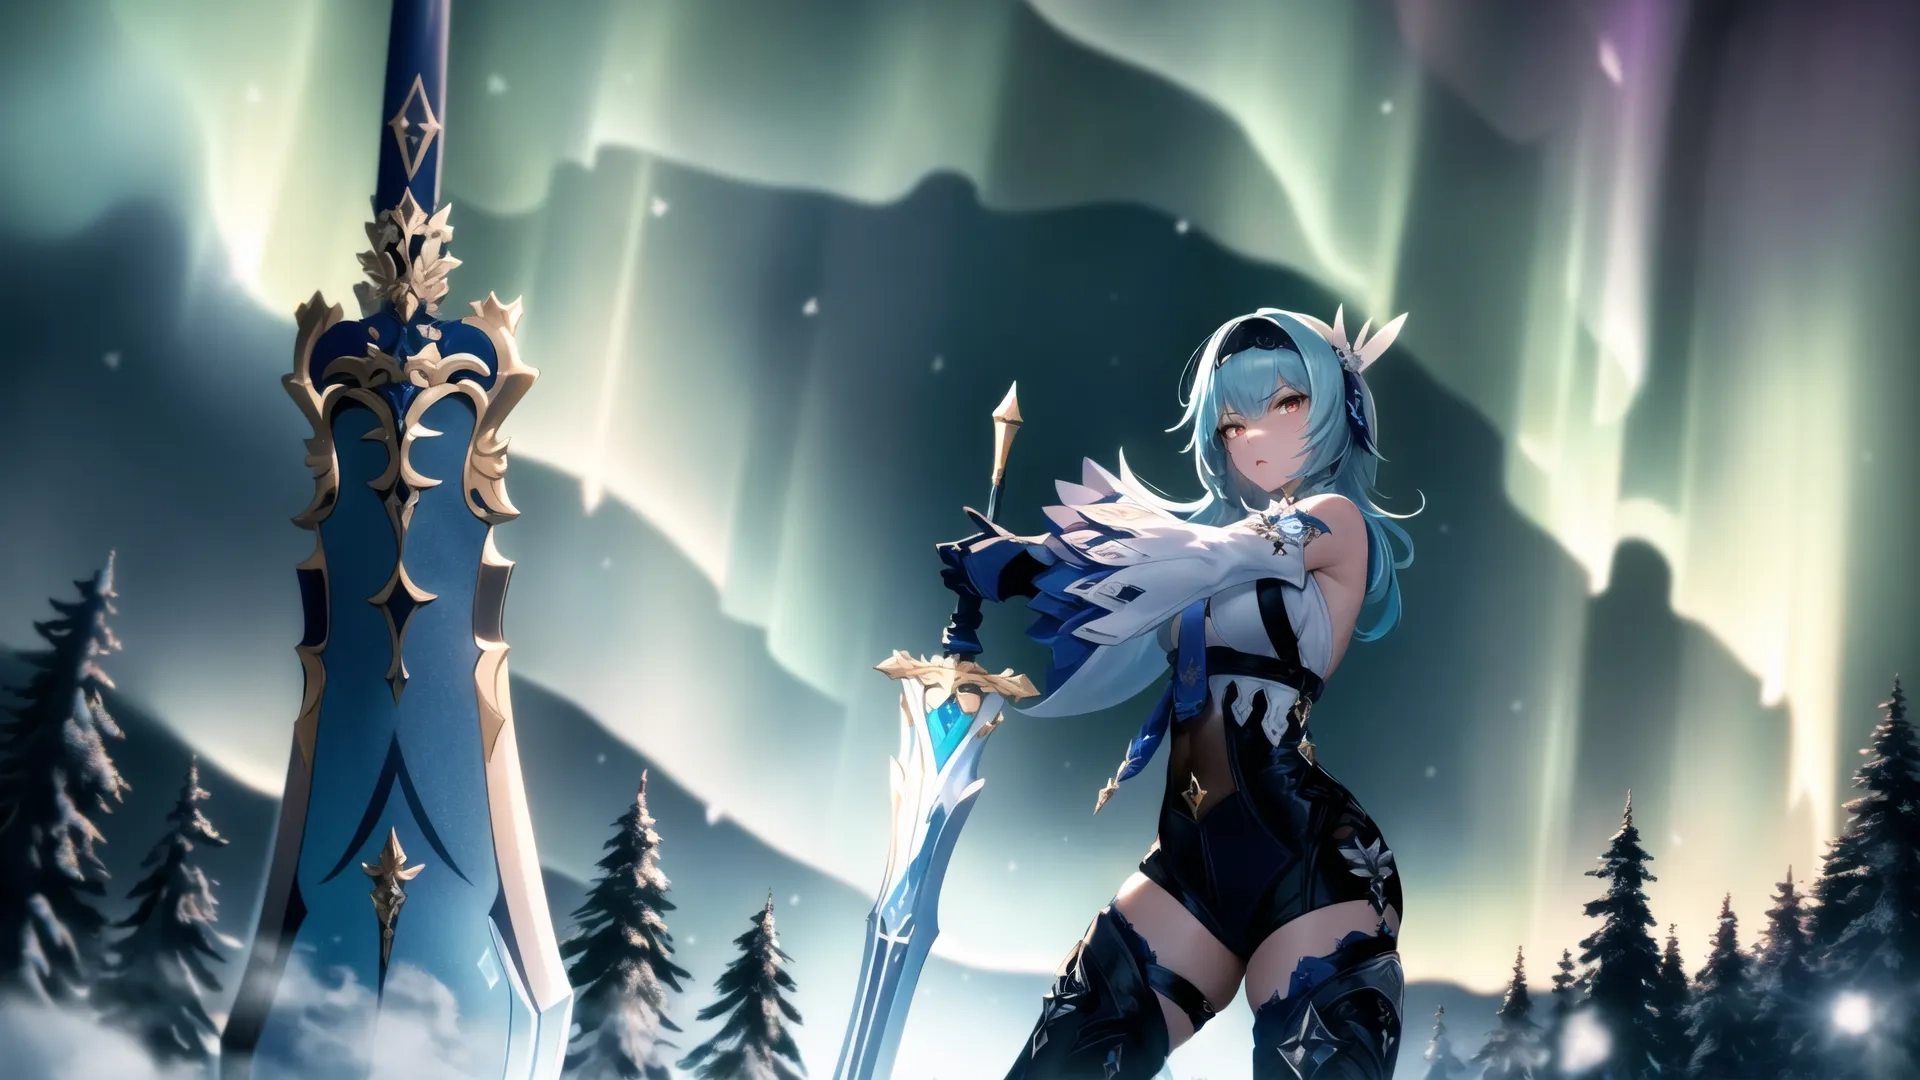 the anime character has just finished her next battle with three swords around her and a forest background behind her with trees, snow, and aurora lights
